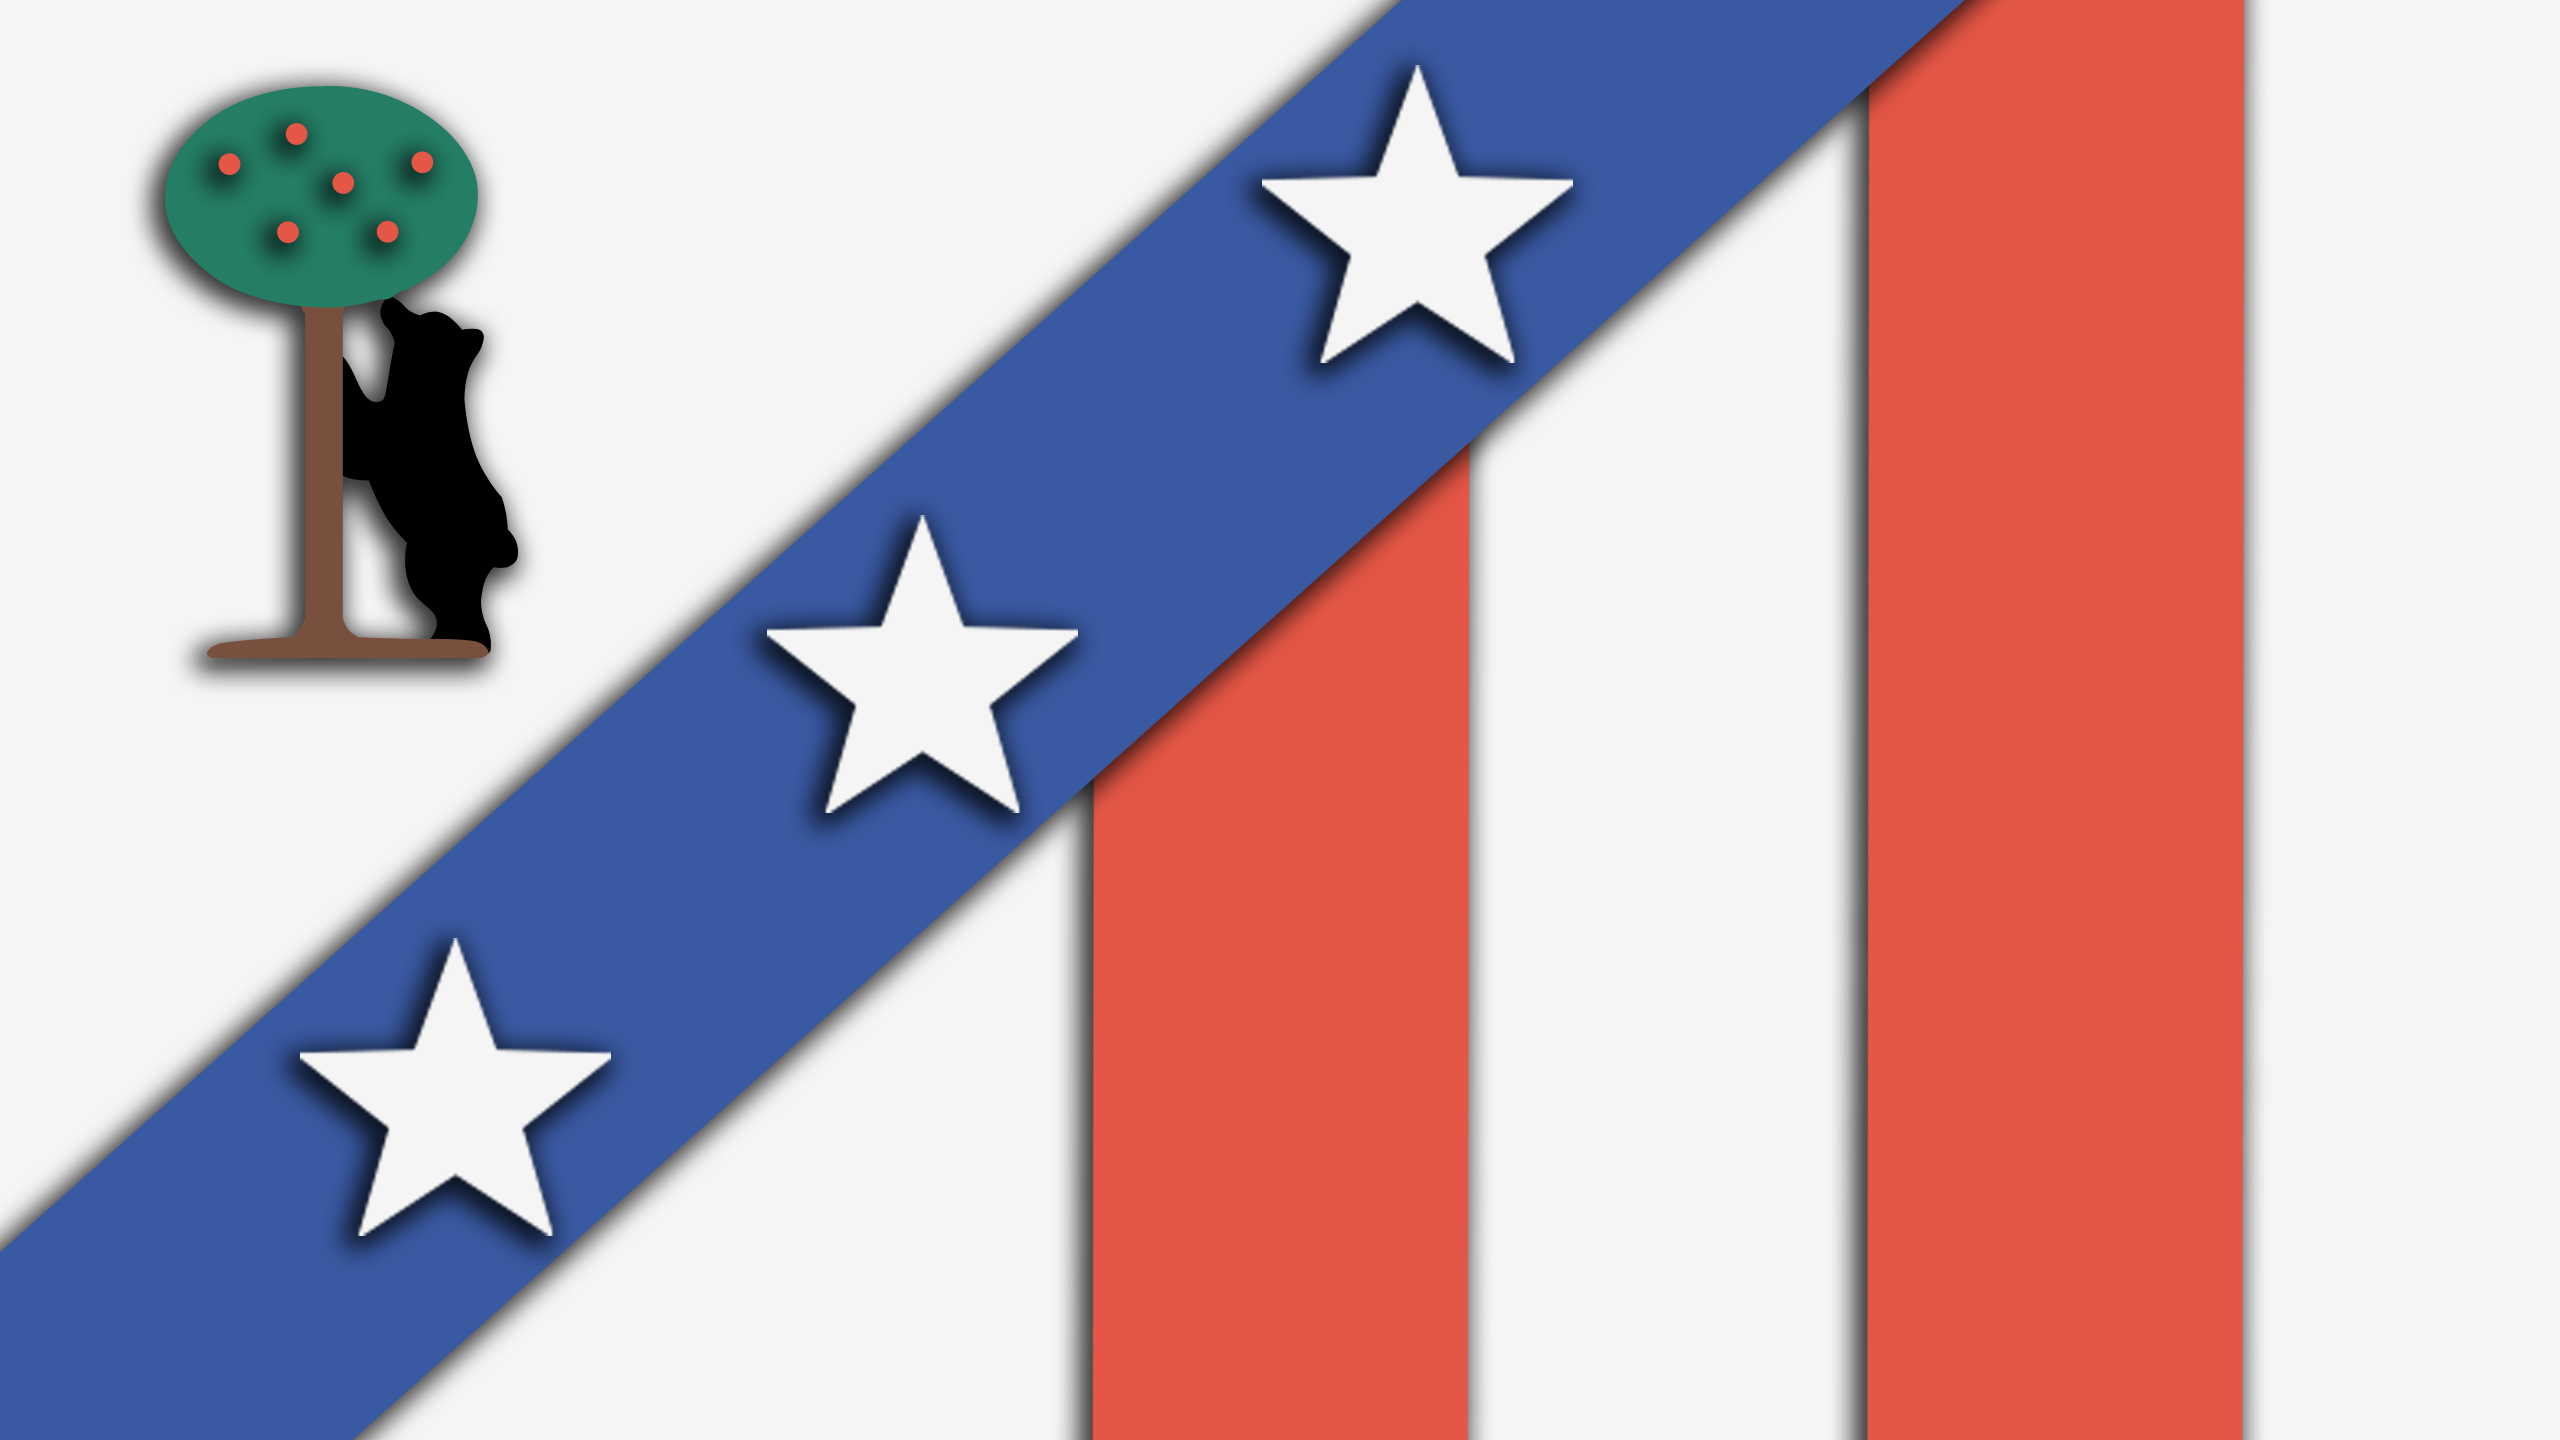 General 2560x1440 Atletico Madrid soccer soccer clubs sport material style sports club